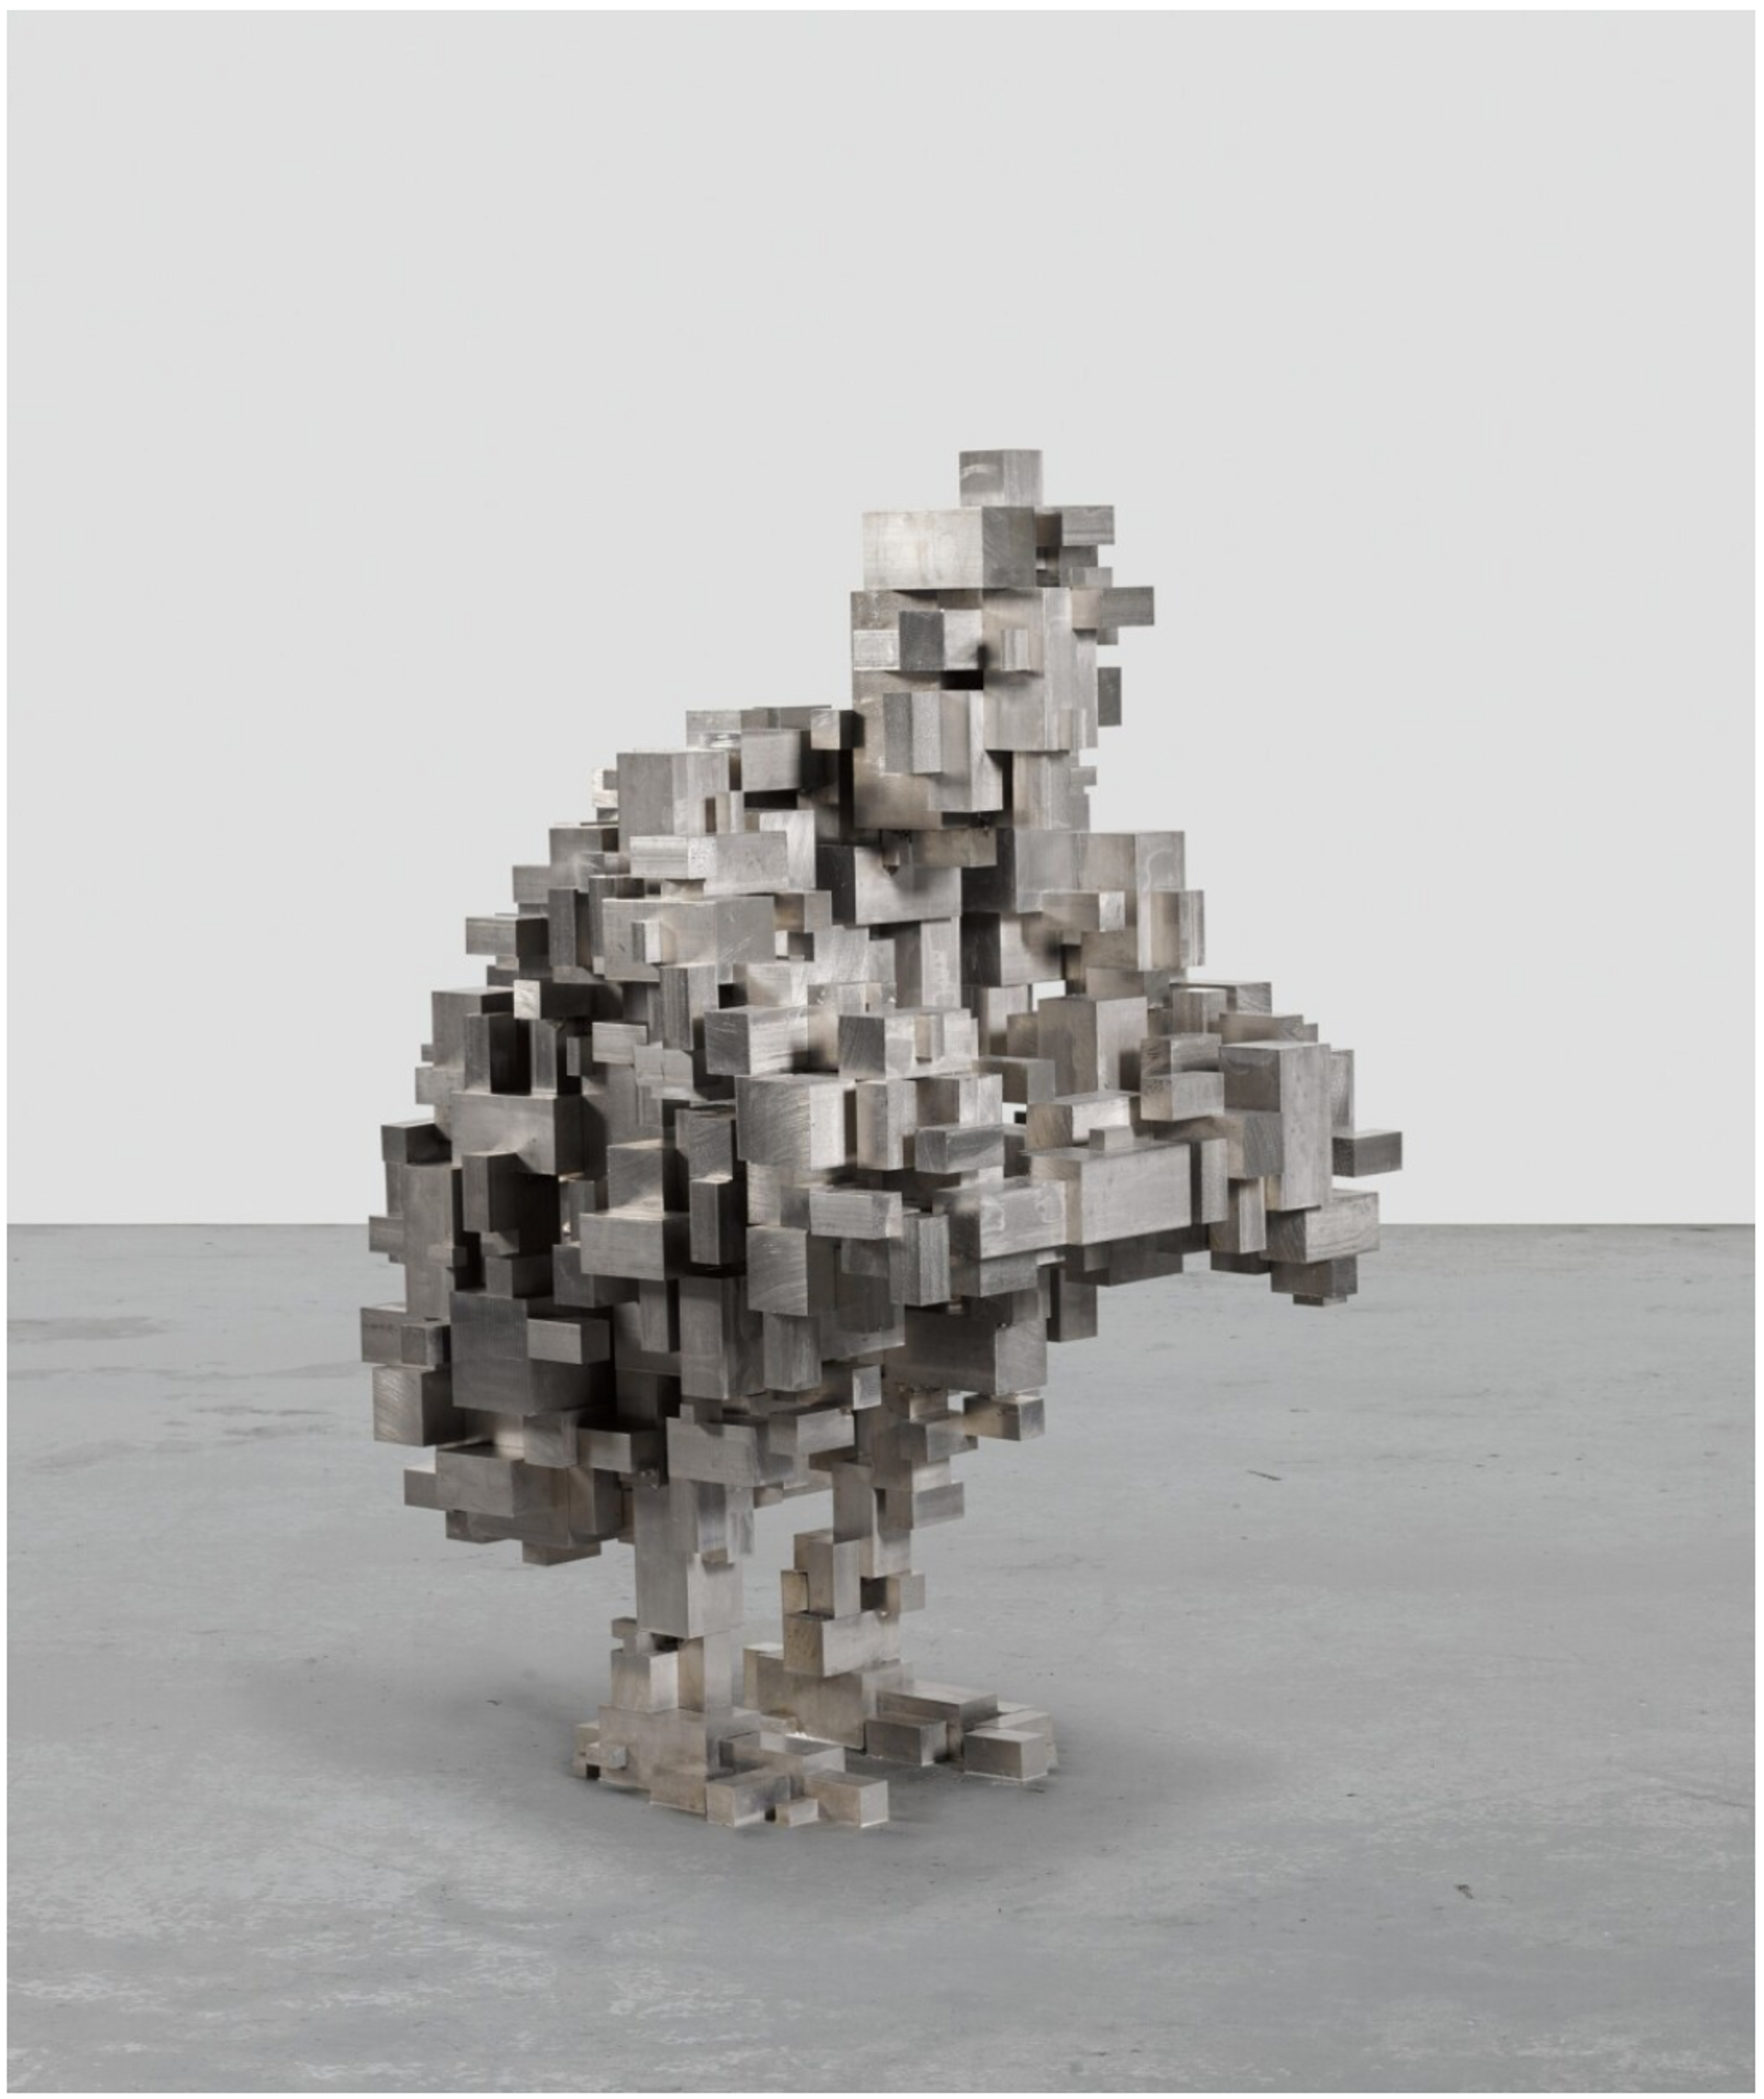 A sculpture of a human figure, crouched and hugging its knees, constructed using small stainless steel blocks. 